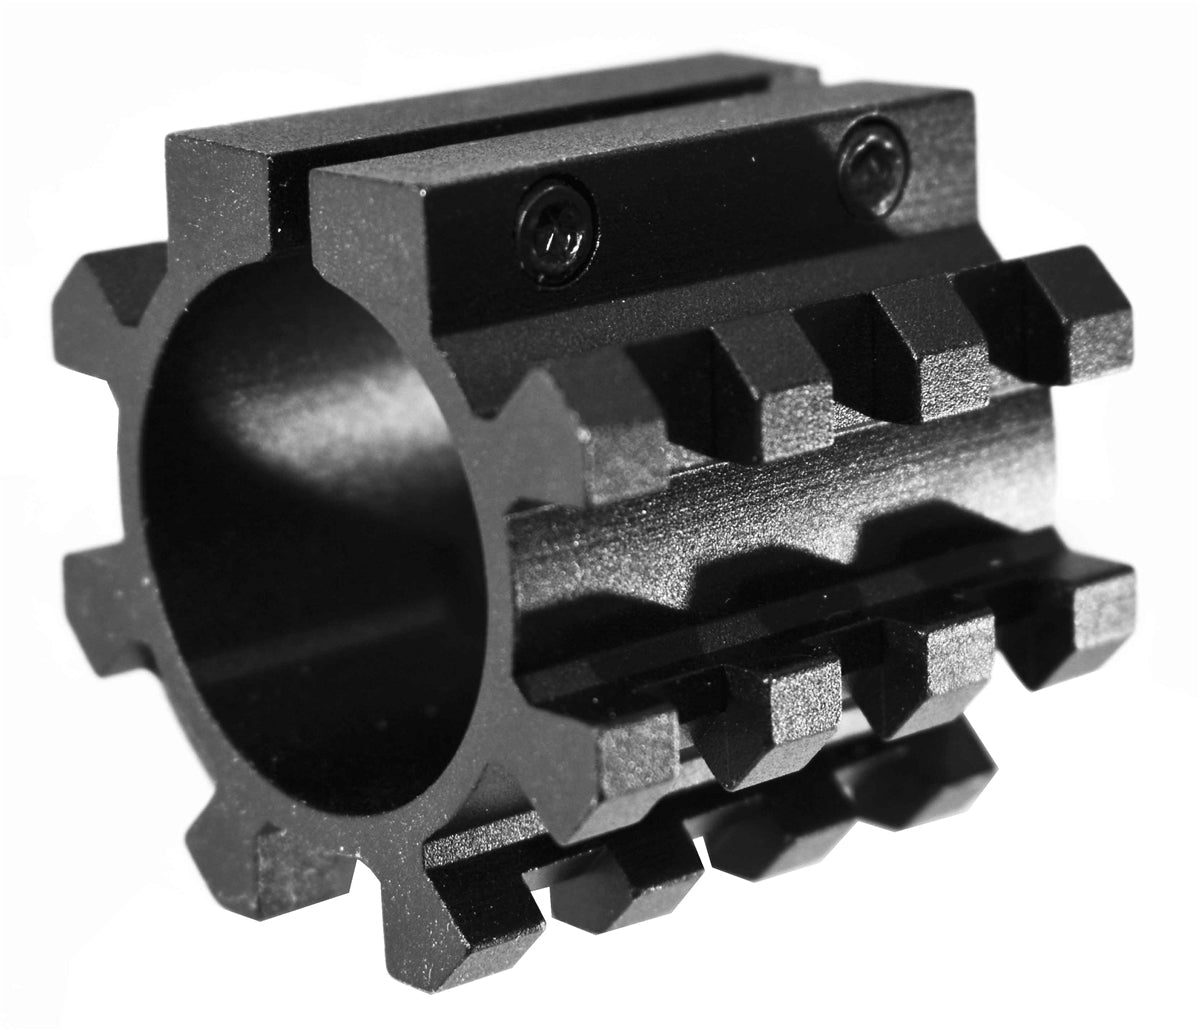 Tactical Picatinny Rail Mount Adapter for Magazine Tubes Compatible With Mossberg Maverick 88 12 Gauge Pumps. - TRINITY SUPPLY INC